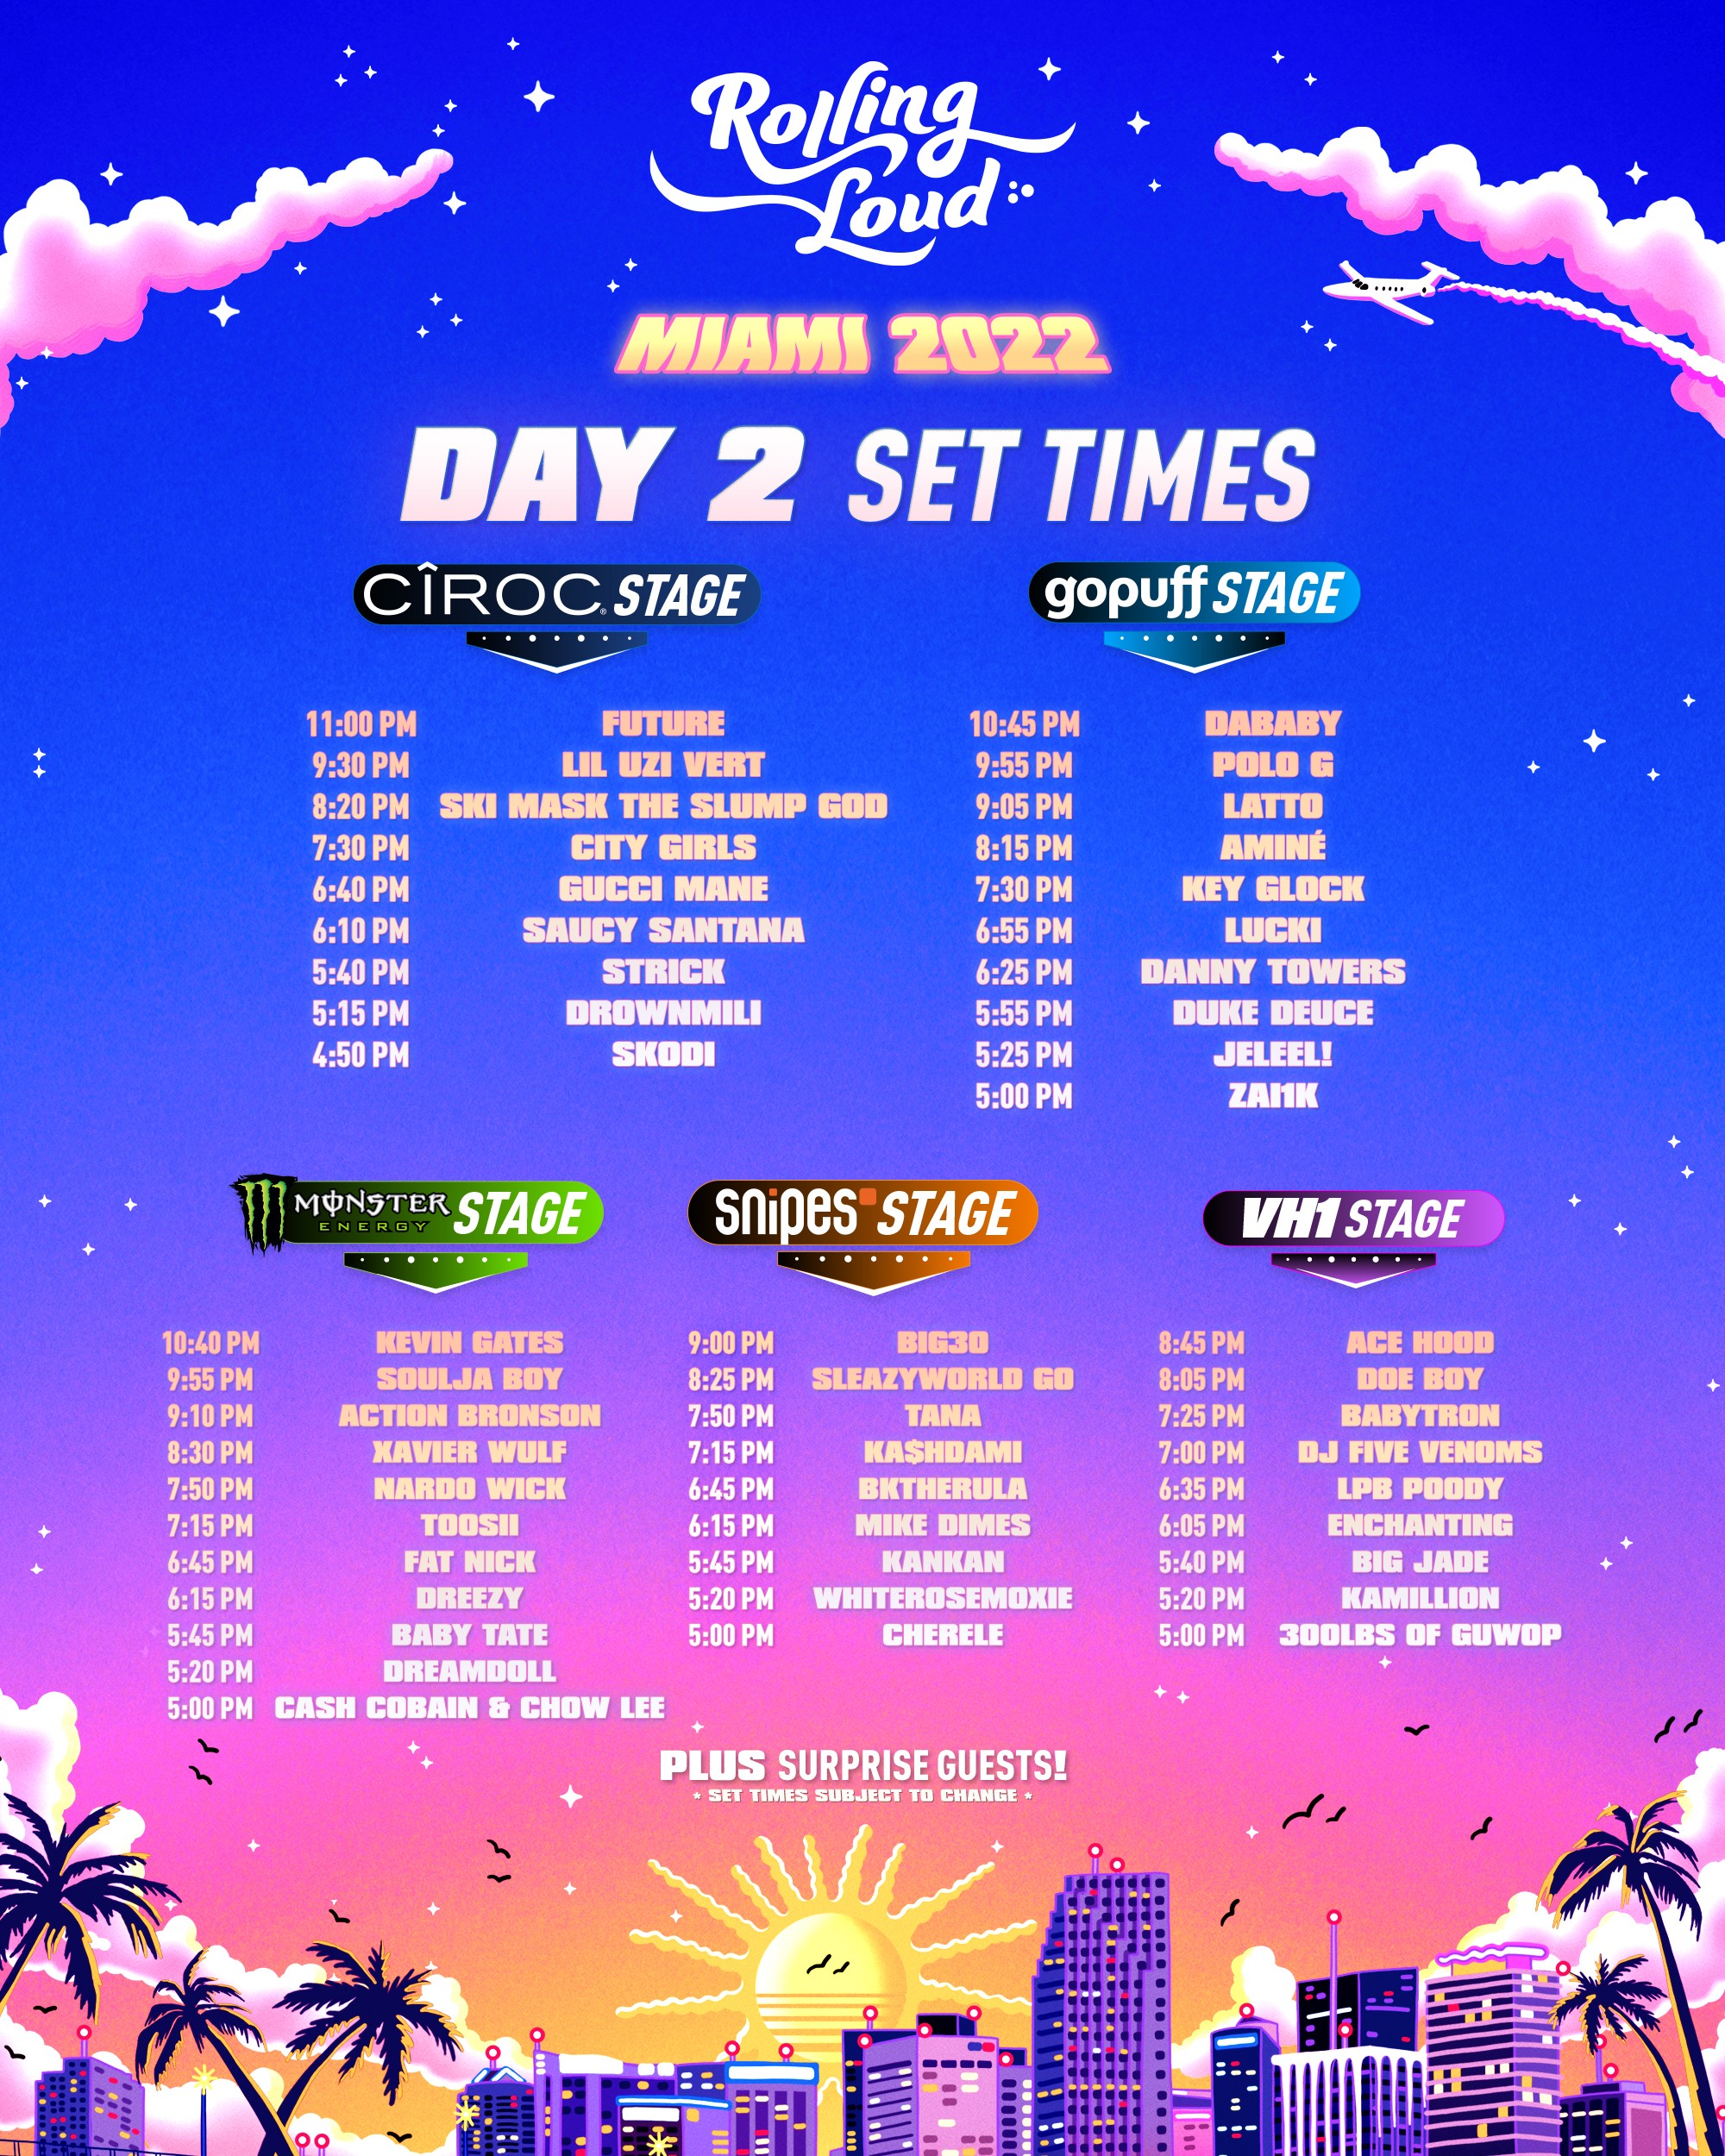 Rolling Loud 2022 Set Times and Livestream Schedule | Miami New Times